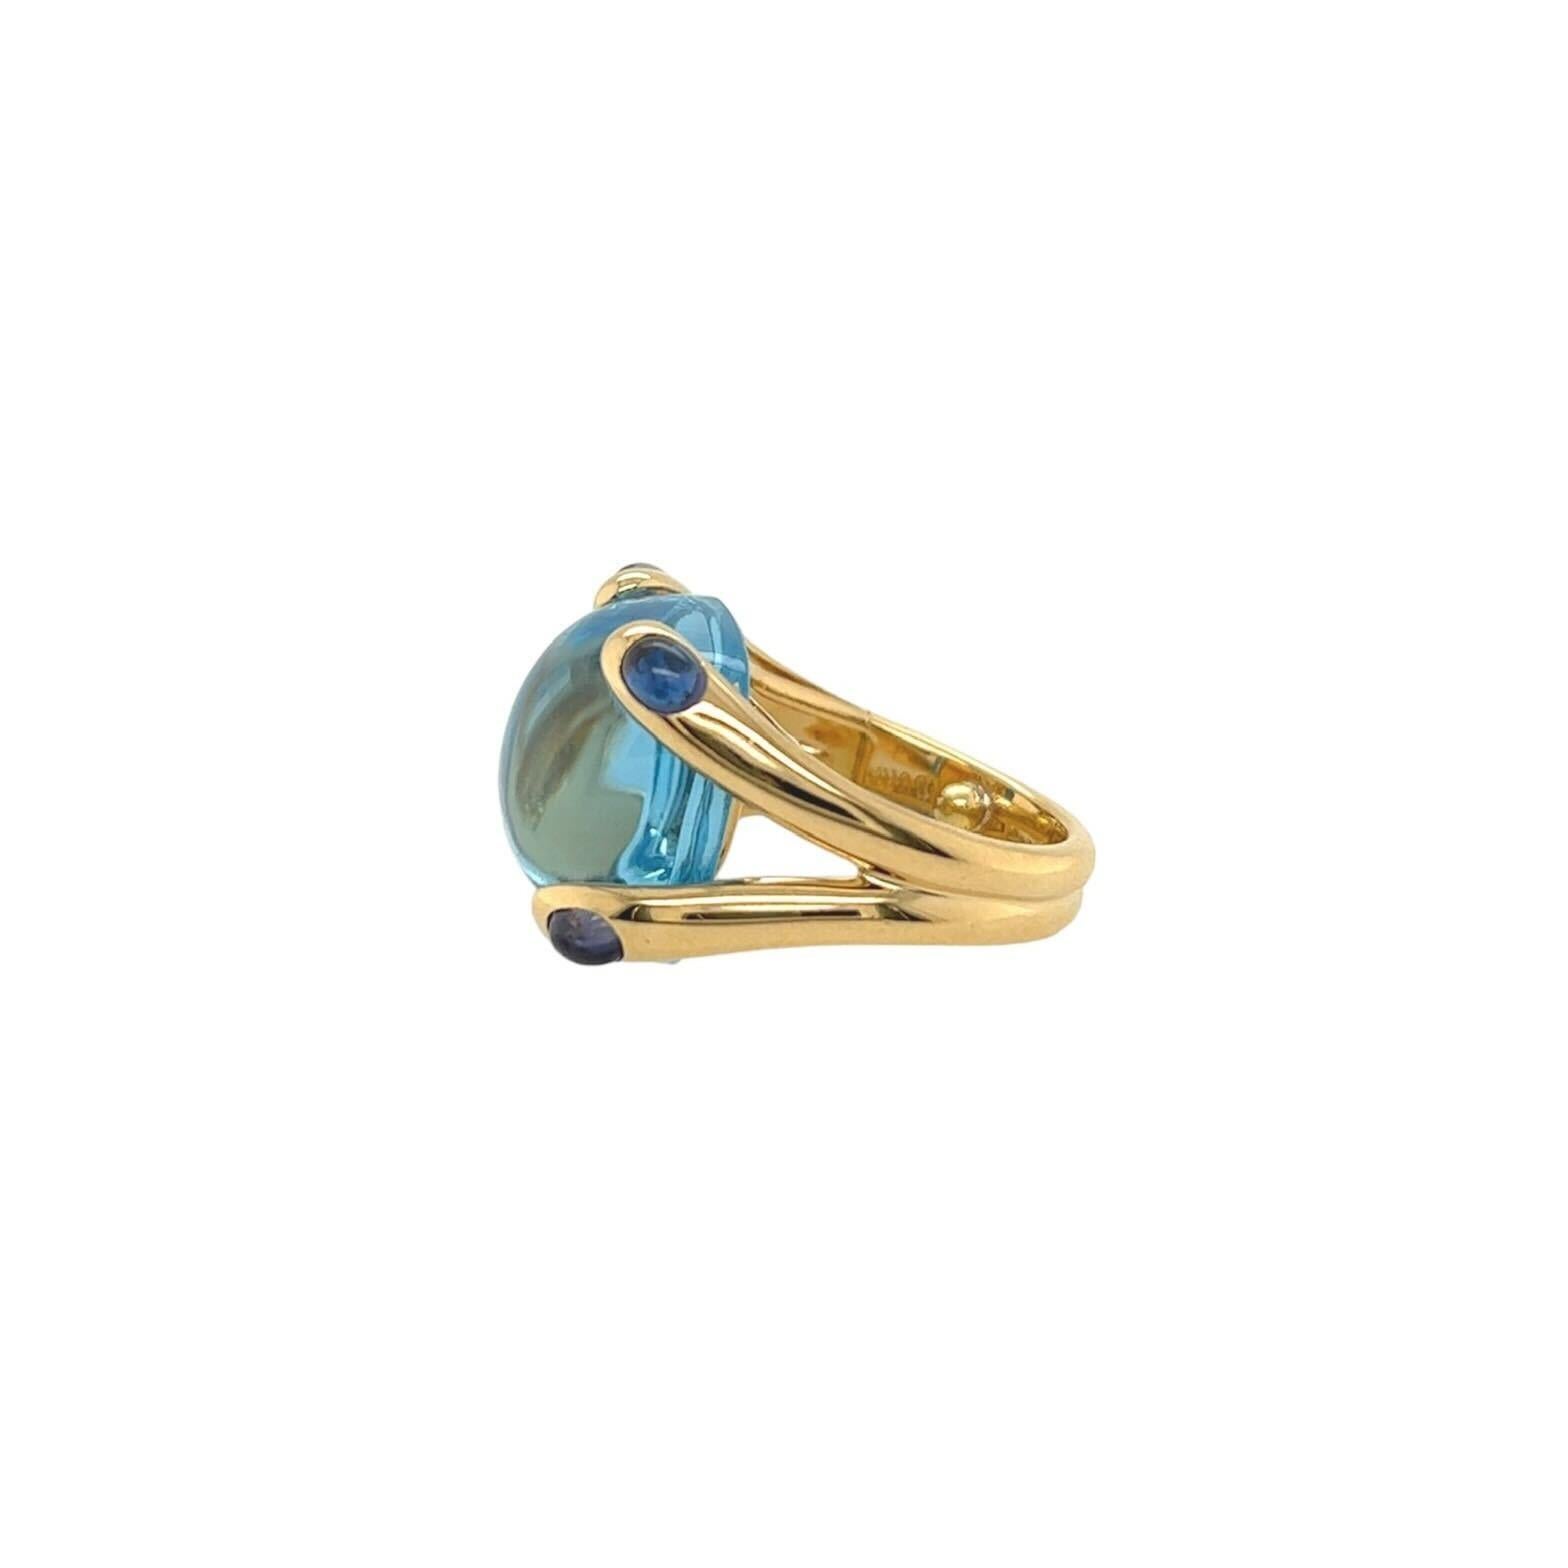 An 18 karat yellow gold, blue topaz and iolite ring, Verdura, Italian The “Candy” ring centering a cabochon blue topaz measuring approximately 15.33 x 14.95 mm held by cabochon iolite tipped prongs. Size approximately 5 1/2. Gross weight